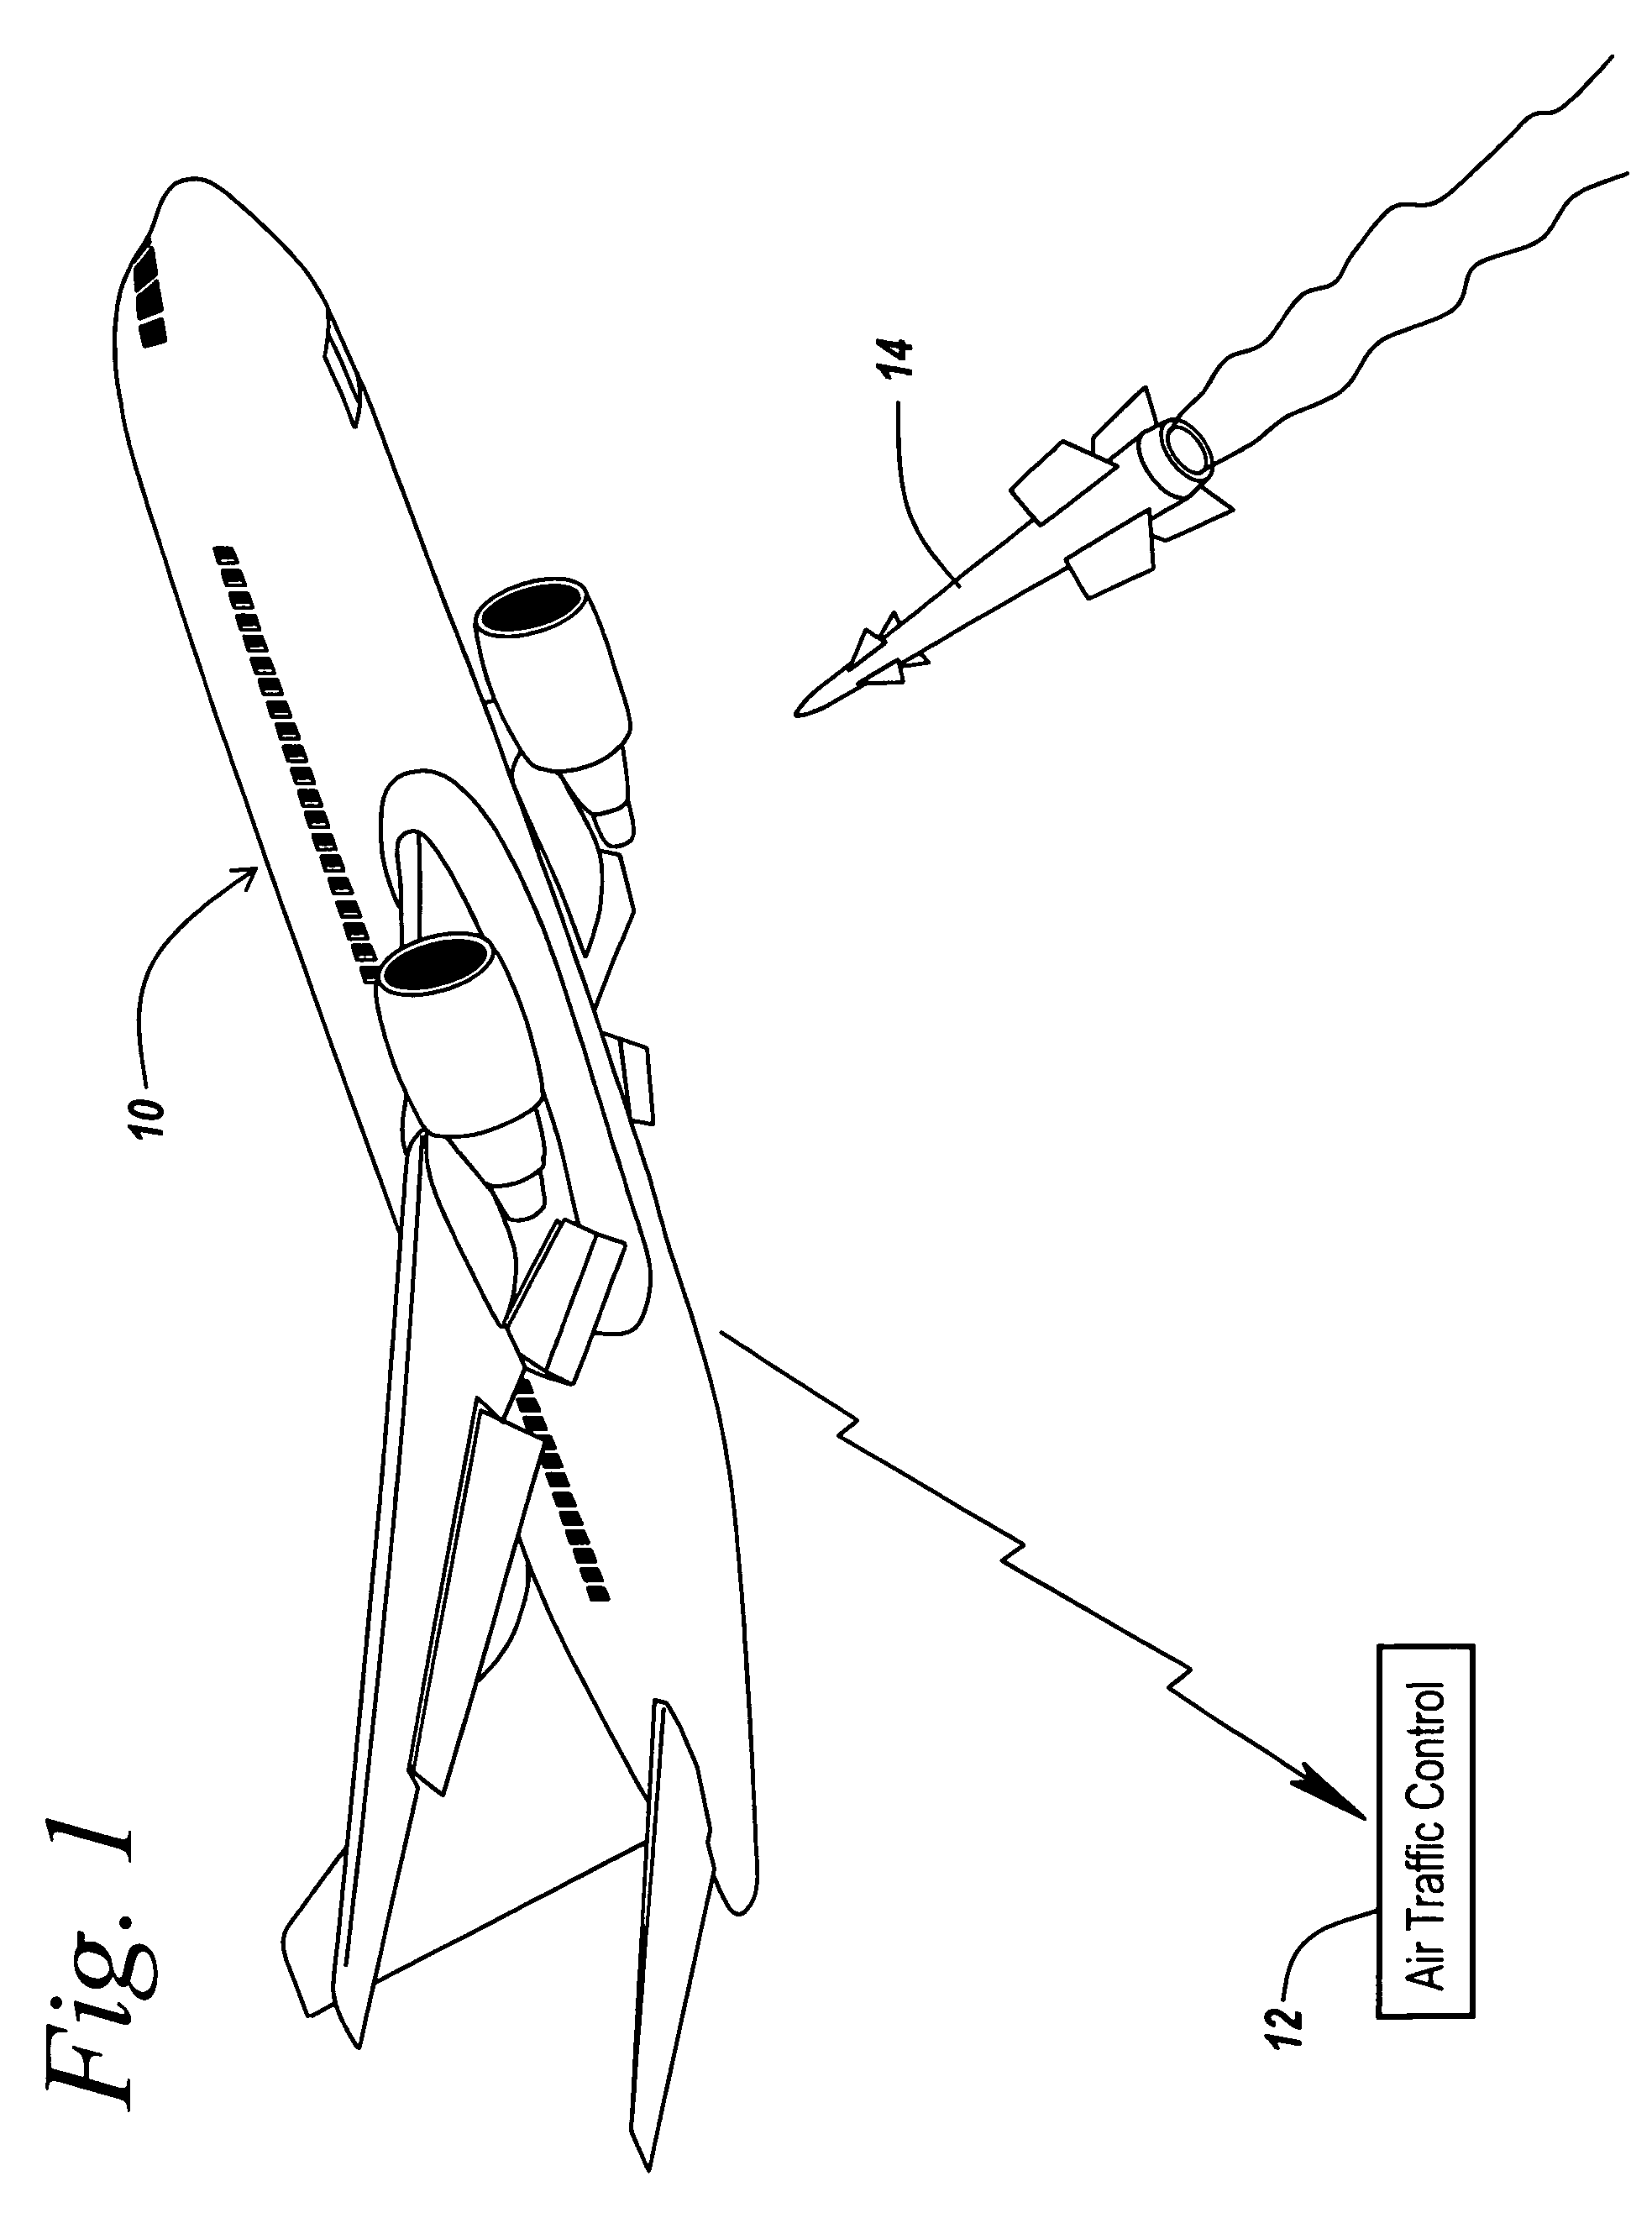 Method and apparatus for reporting a missile threat to a commercial aircraft